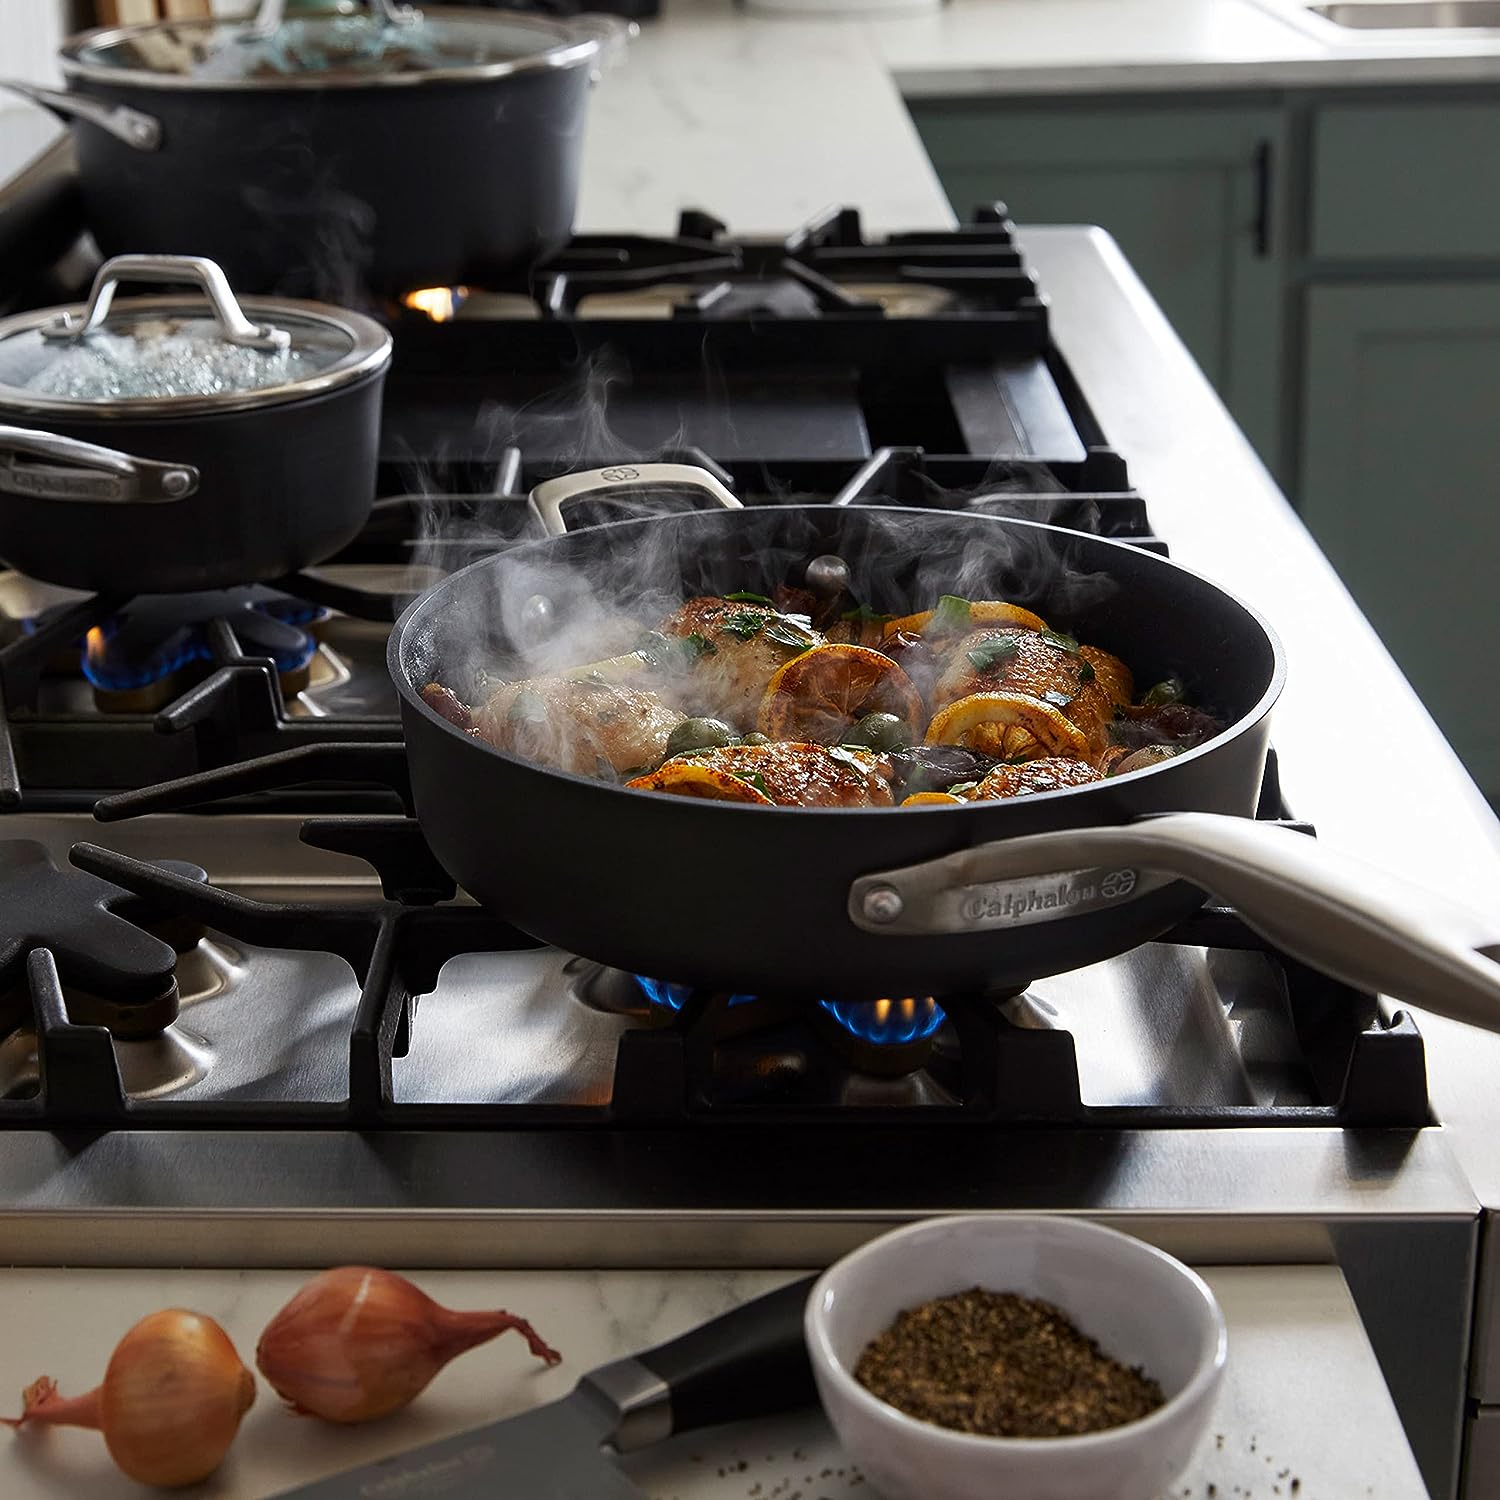 New CALPHALON 10 Premier Hard Anodized Nonstick Fry Pan with Lid